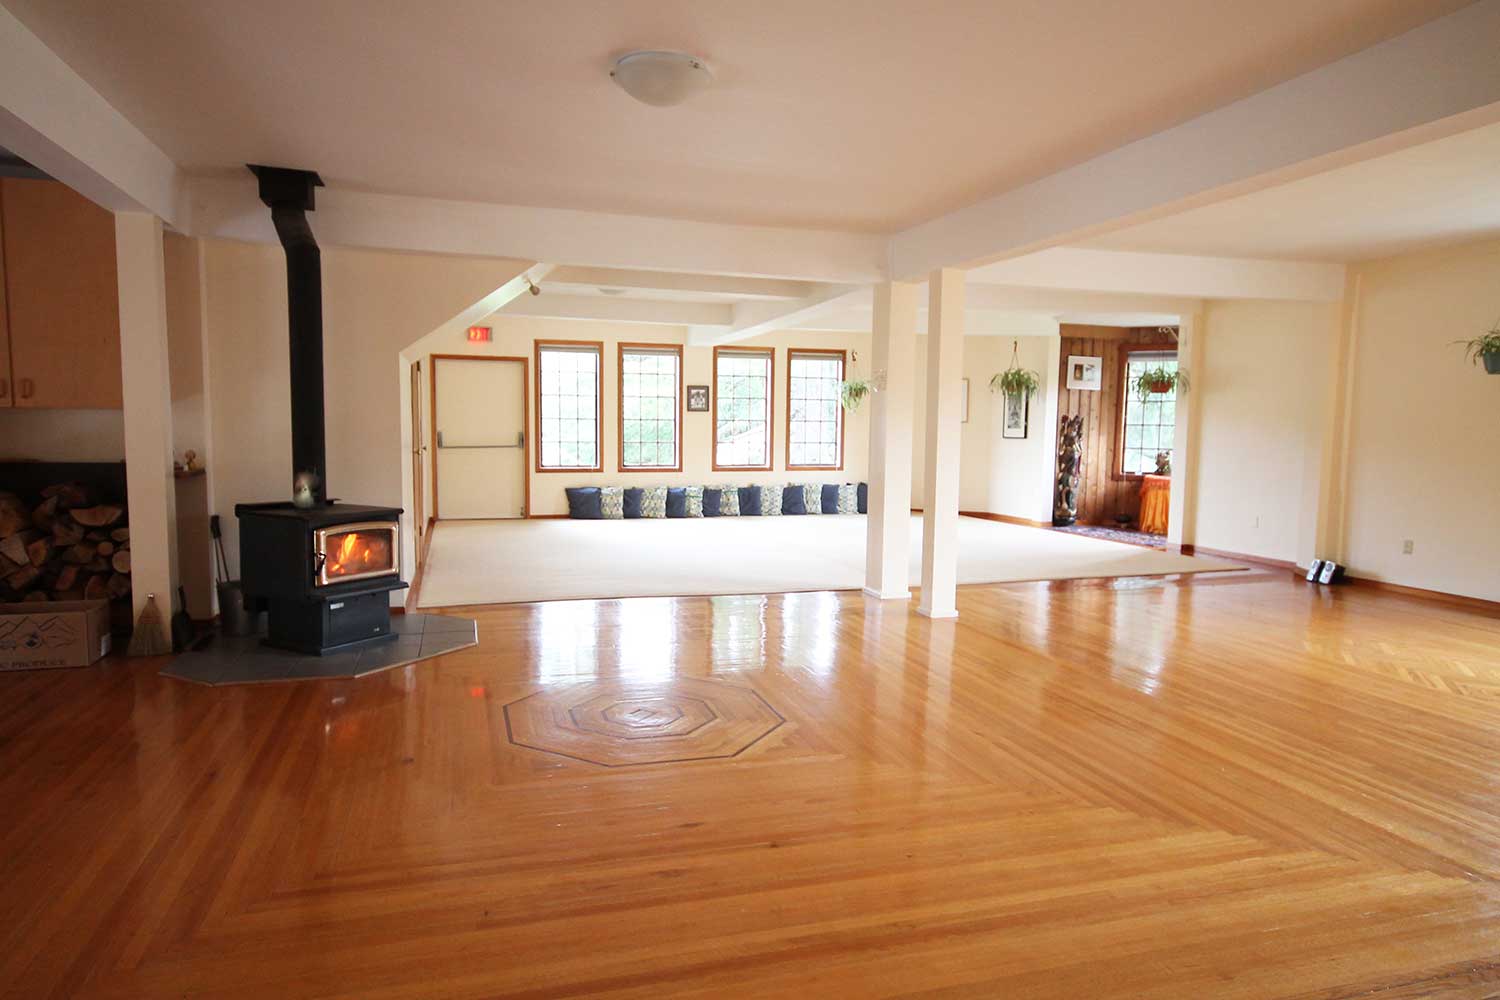 Satsang Room at The Salt Spring Centre of Yoga retreat rental space